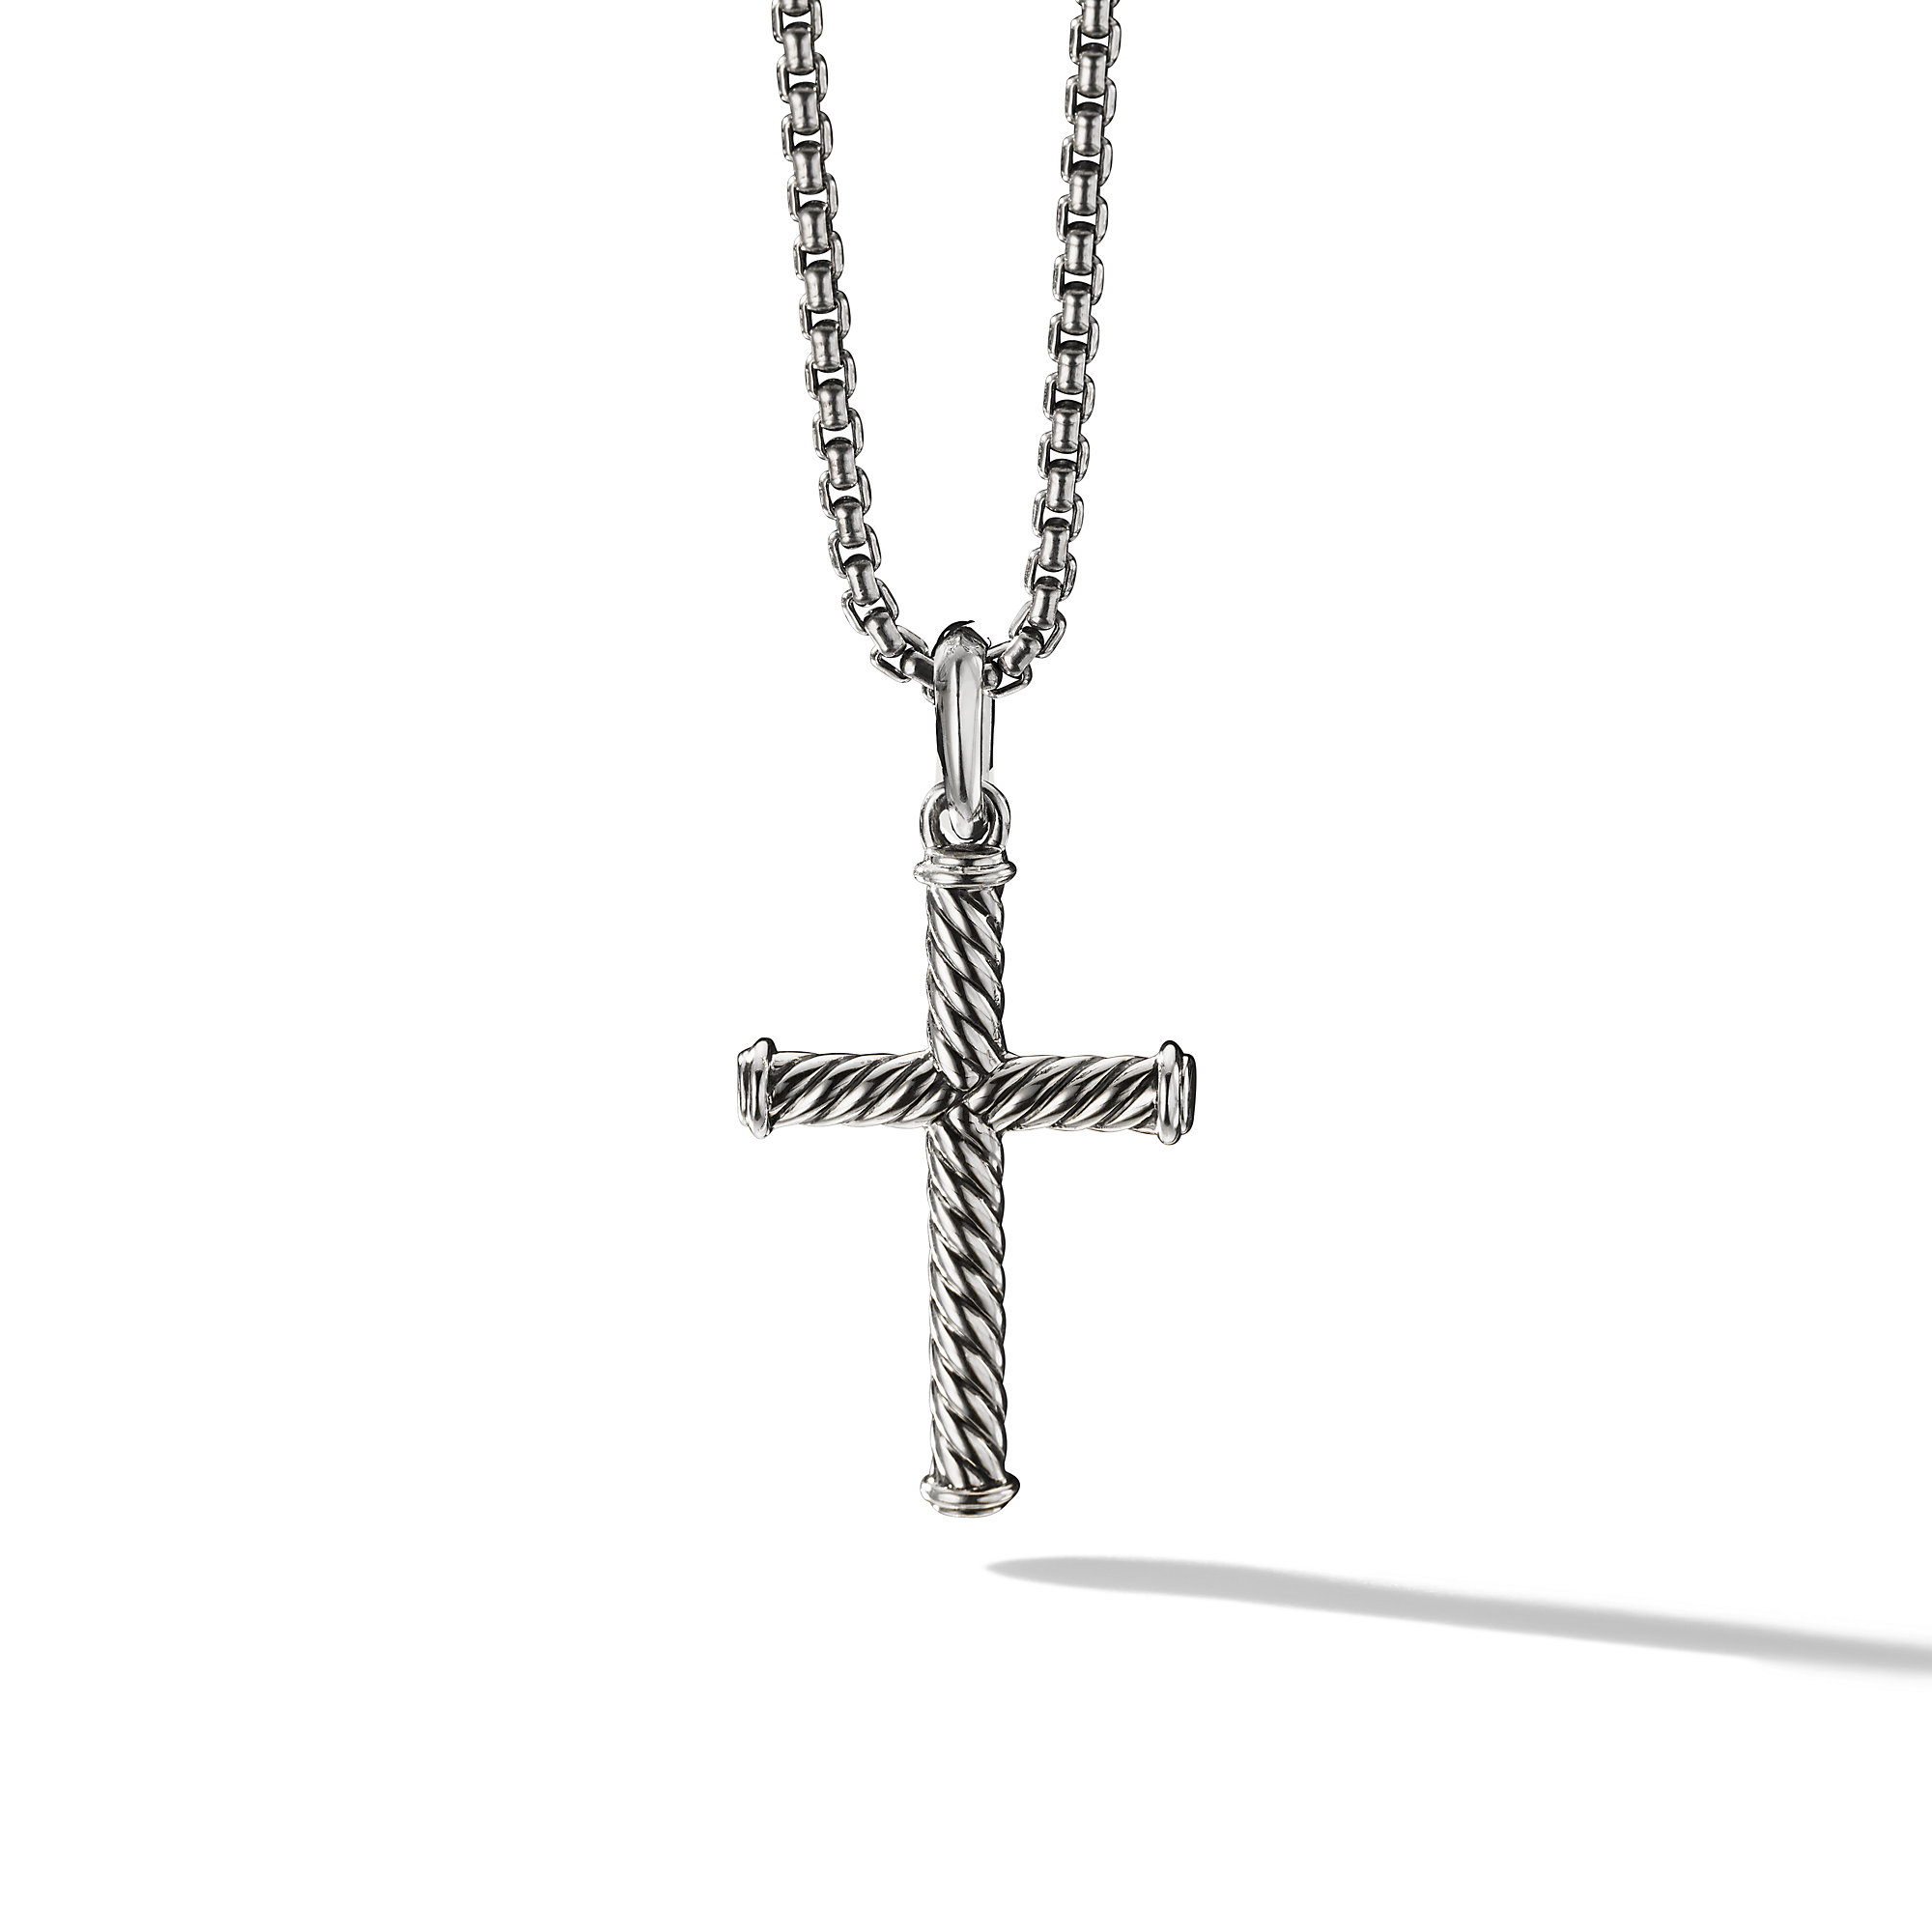 Cable Cross Pendant in Sterling Silver, 35mm